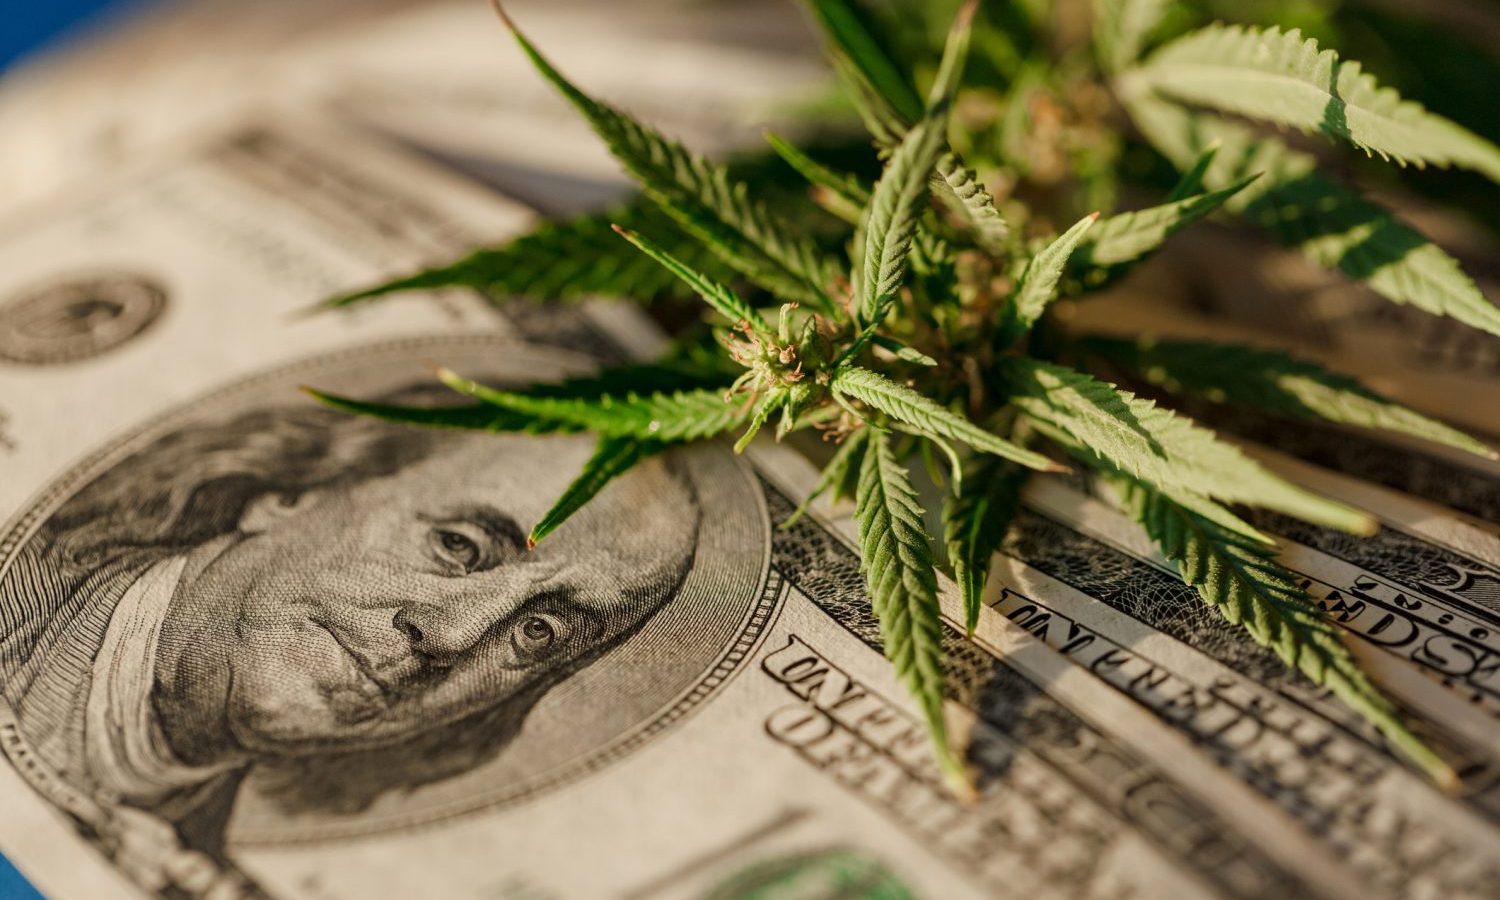 Will We Finally Have Free Trade For Marijuana After Legalization?